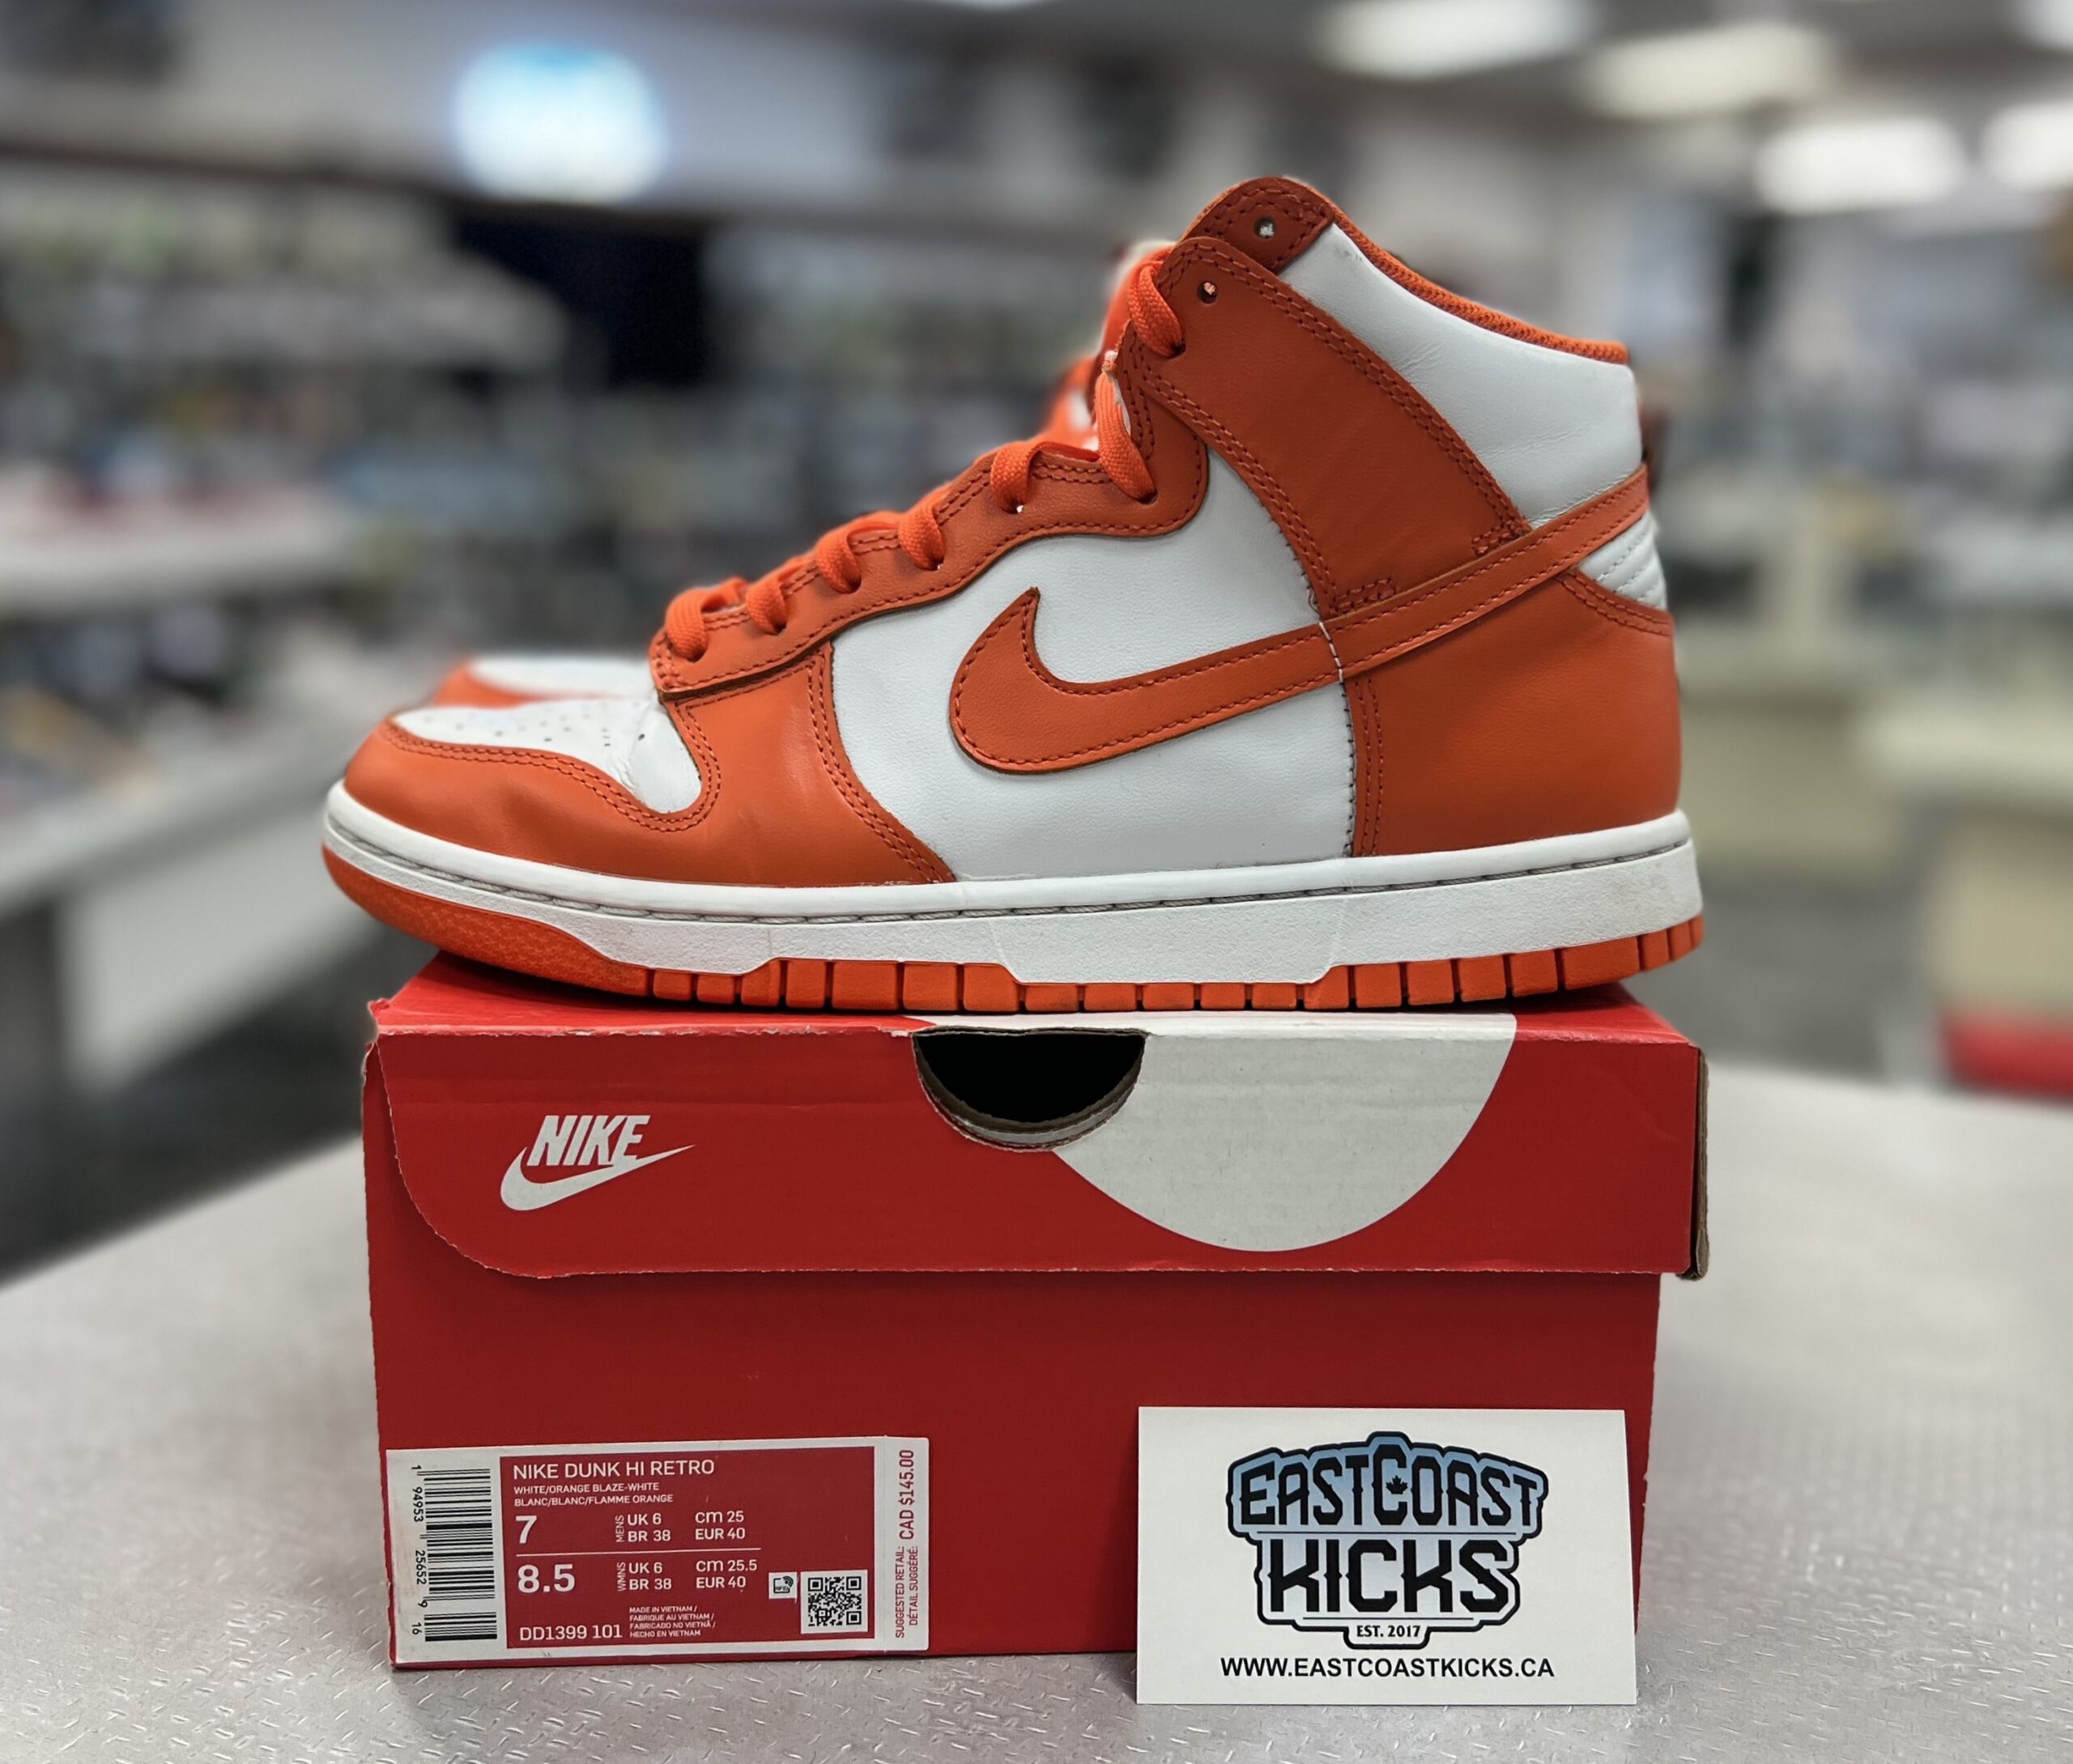 Preowned Nike Dunk High Syracuse Size 7